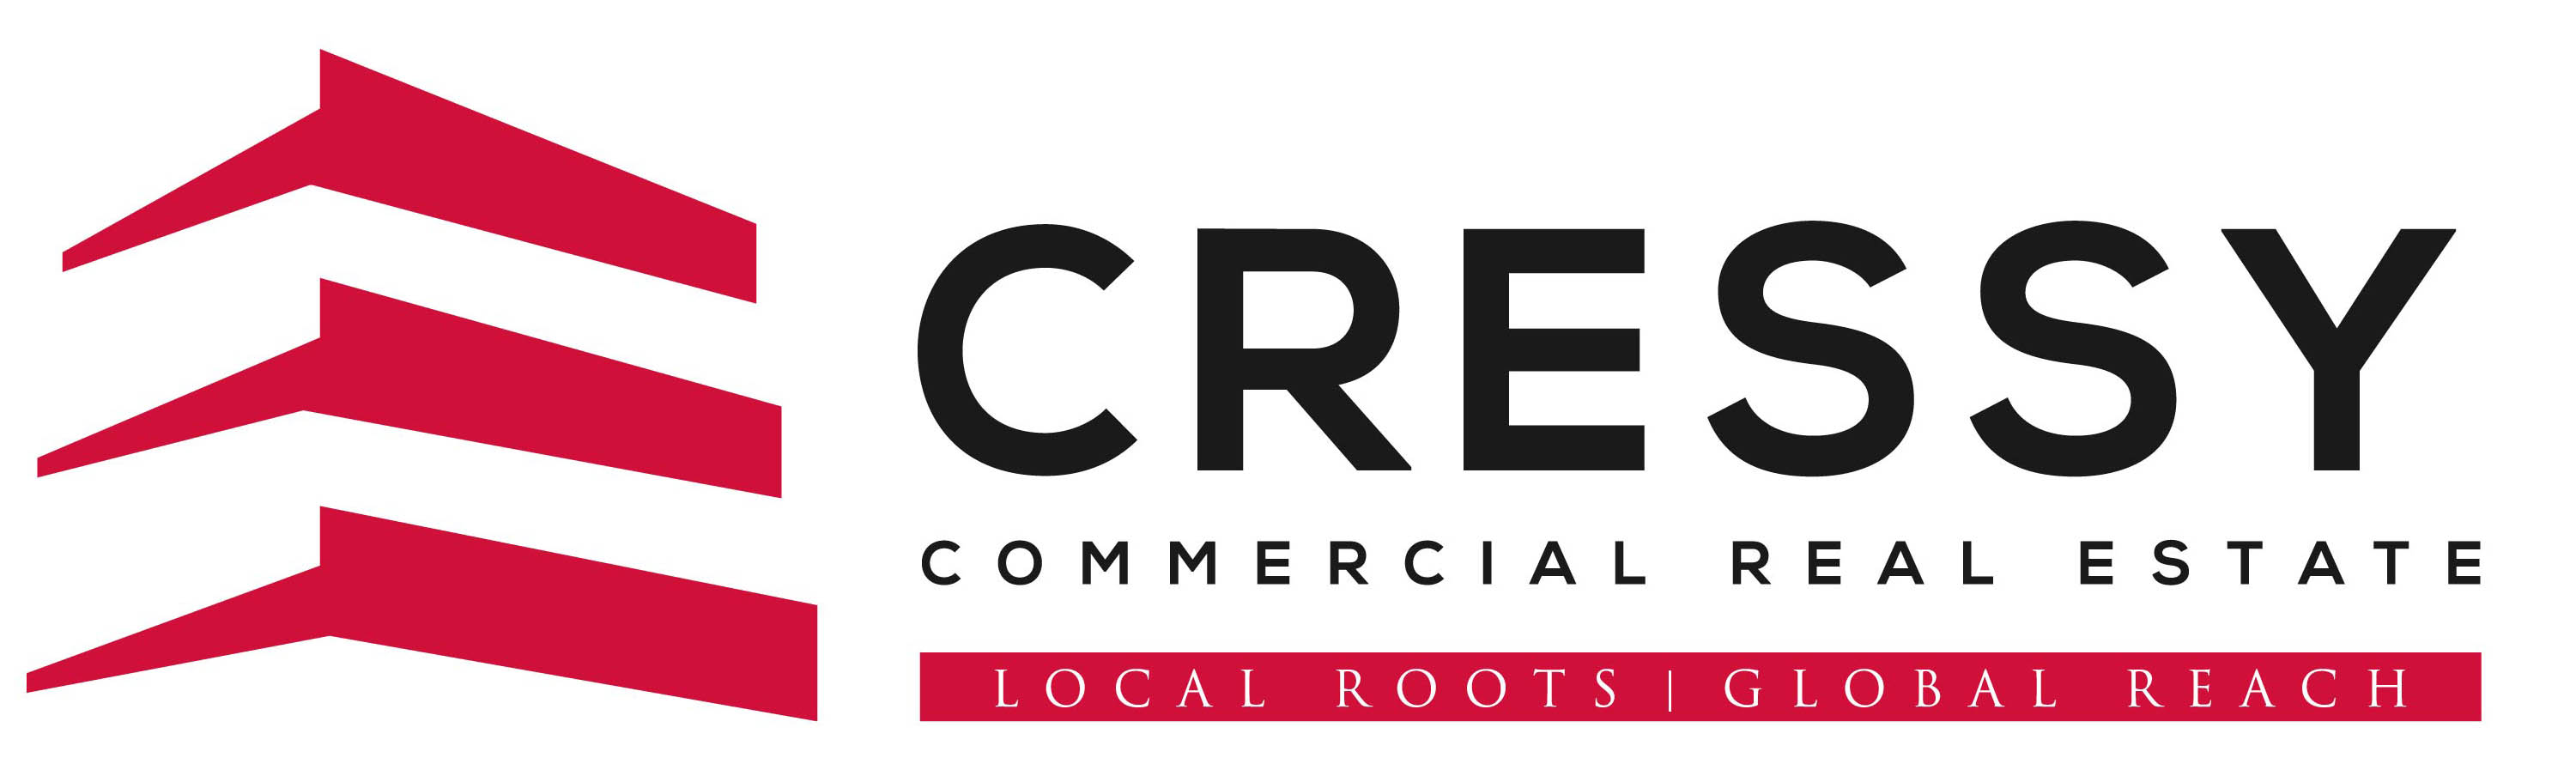 Cressy Commercial Real Estate